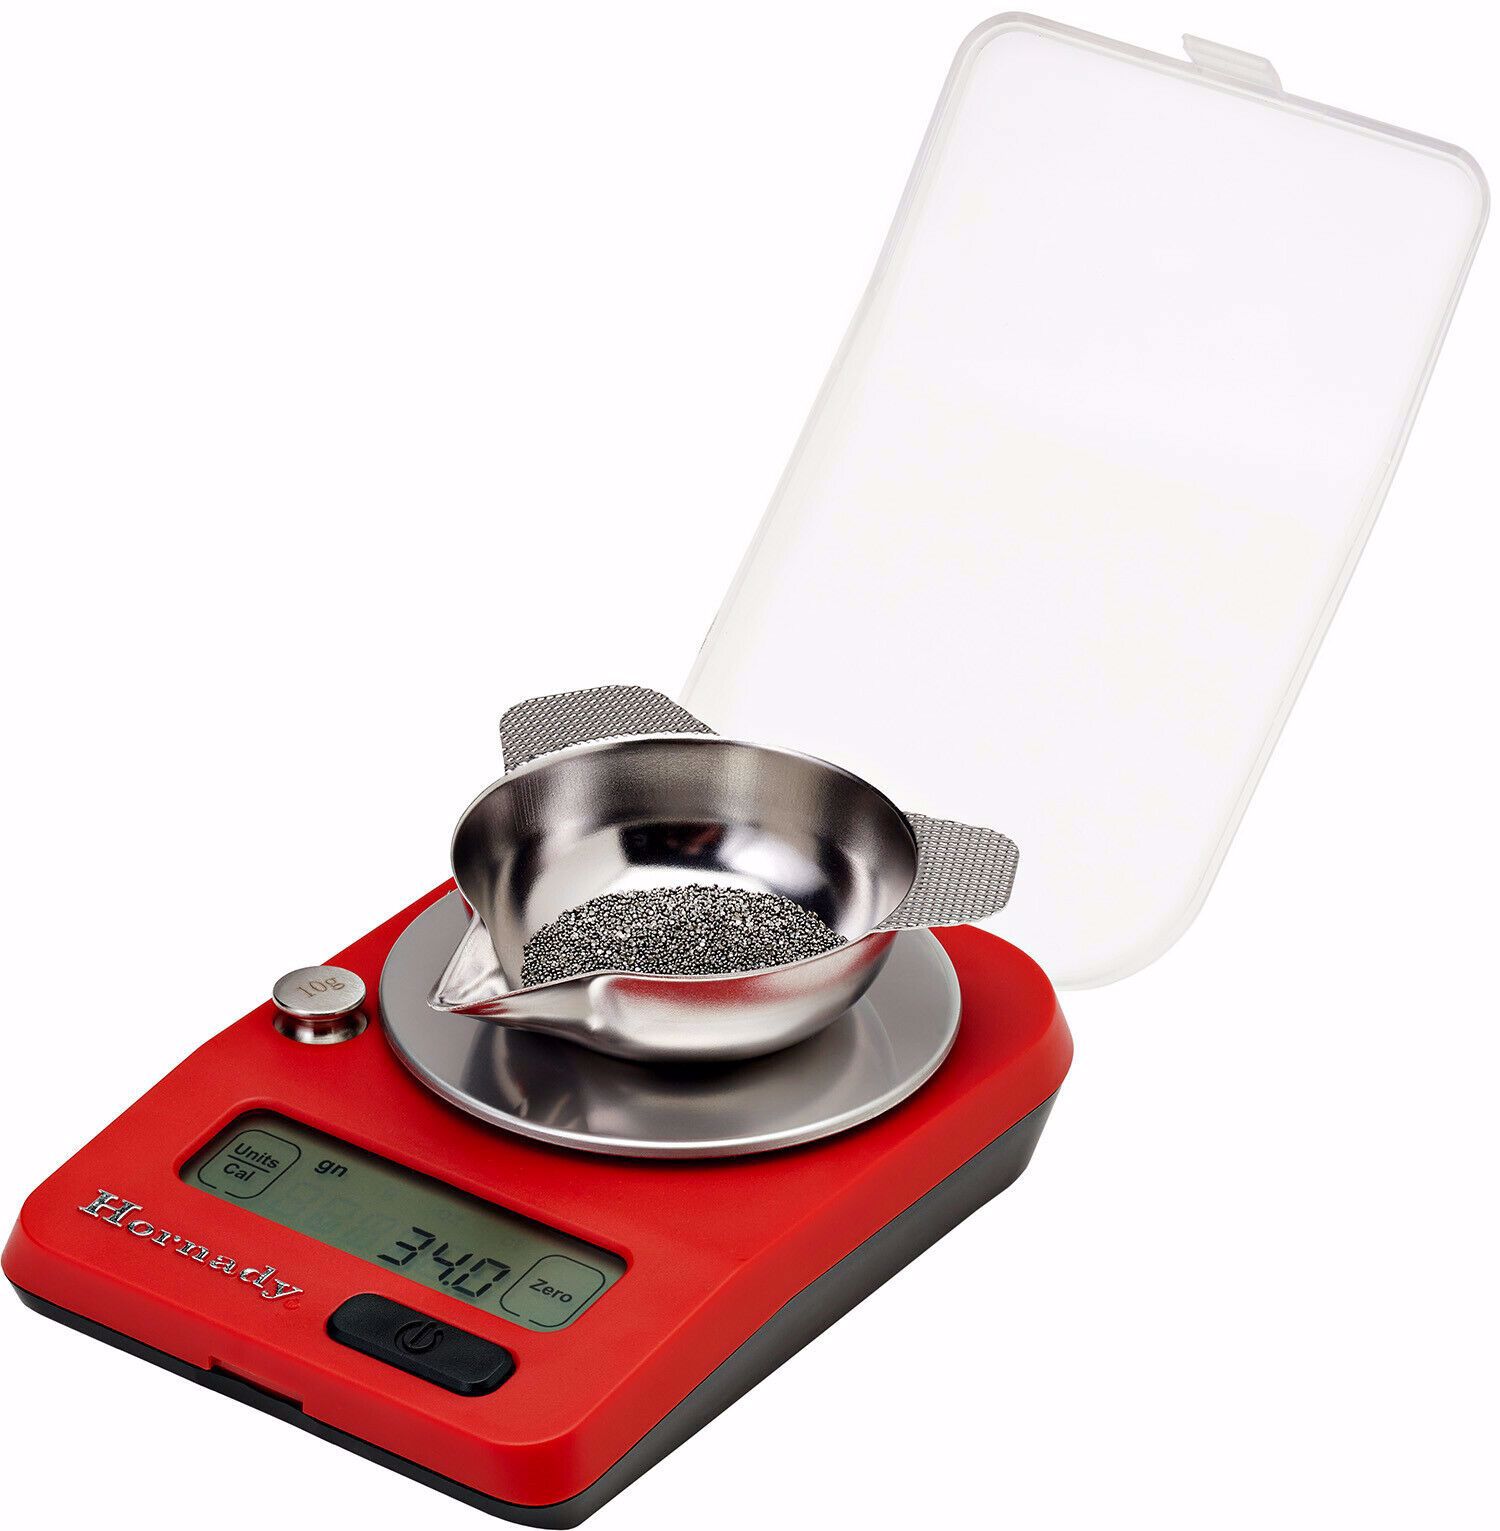 Hornady G3-1500 Electronic Scale Export